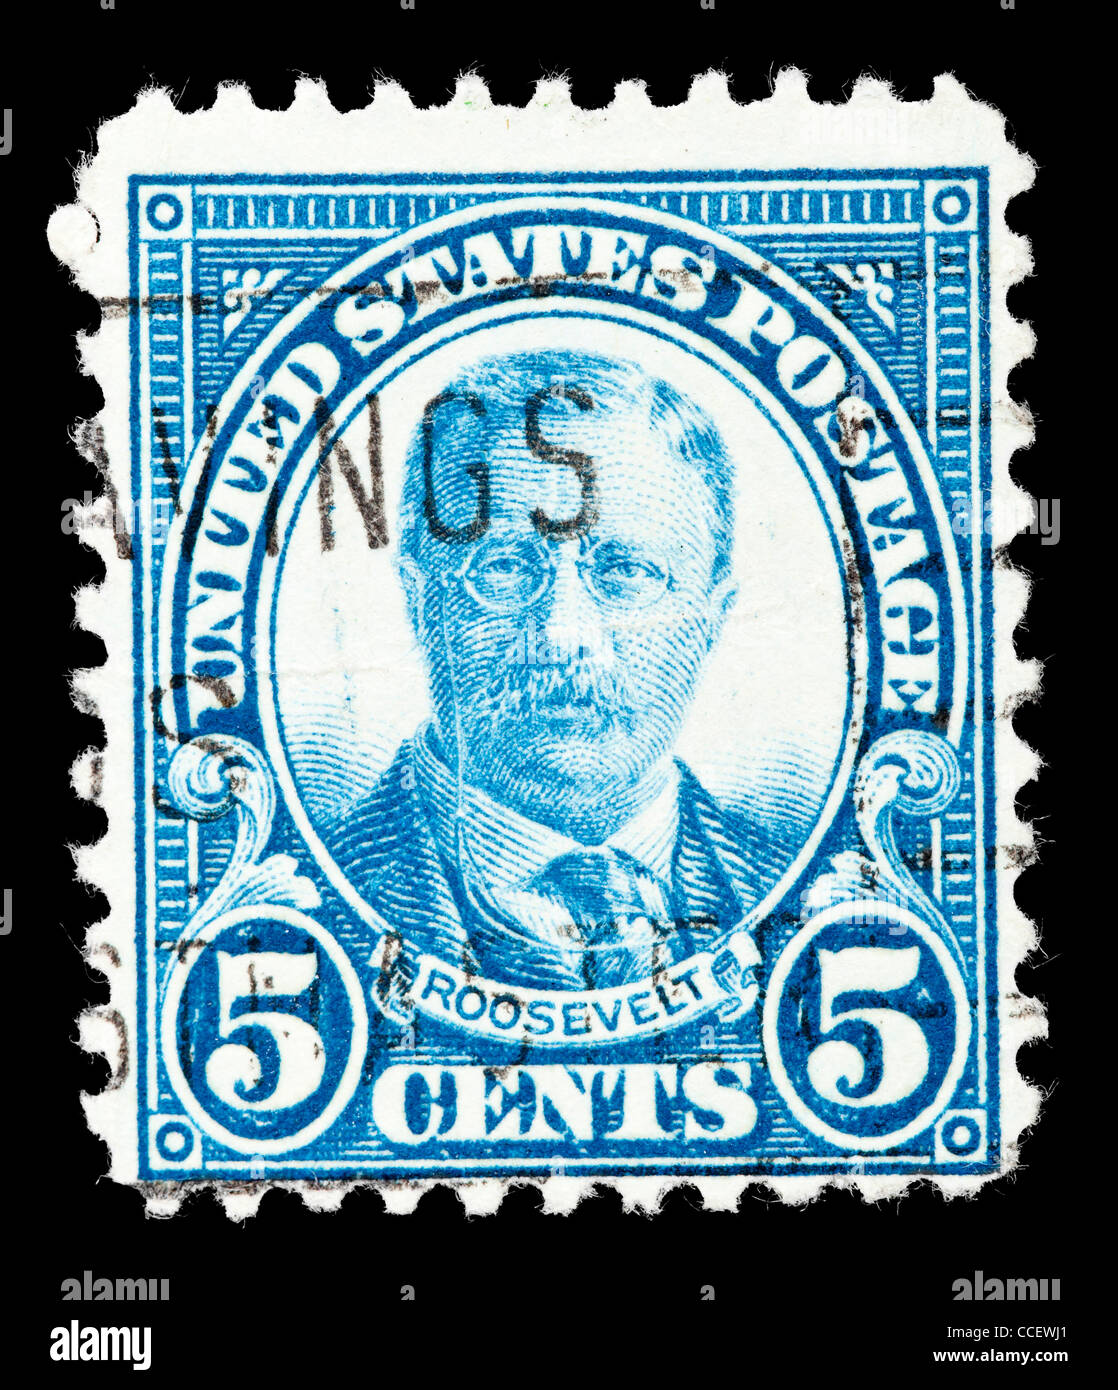 Postage stamp: United States Postage, Theodore Roosevelt, 5 cent, 1922, stamped Stock Photo